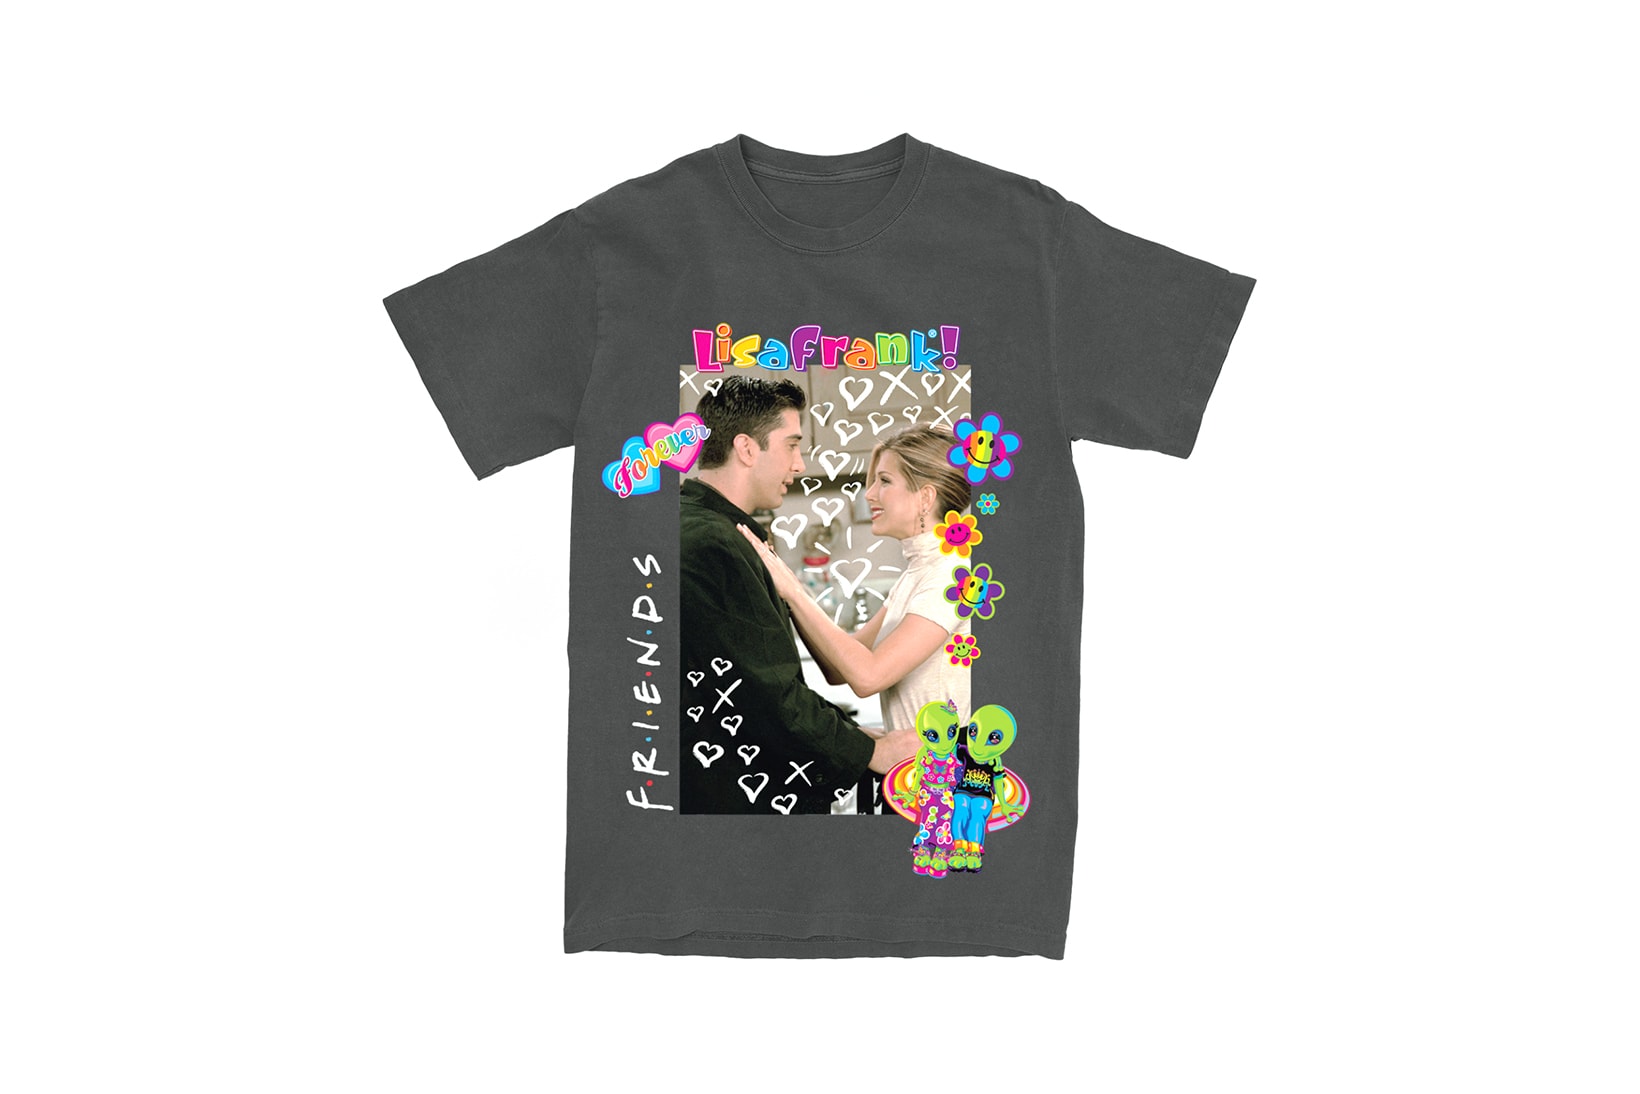 Lisa Frank x Friends TV Show Clothing Collaboration Collection T-Shirt Black